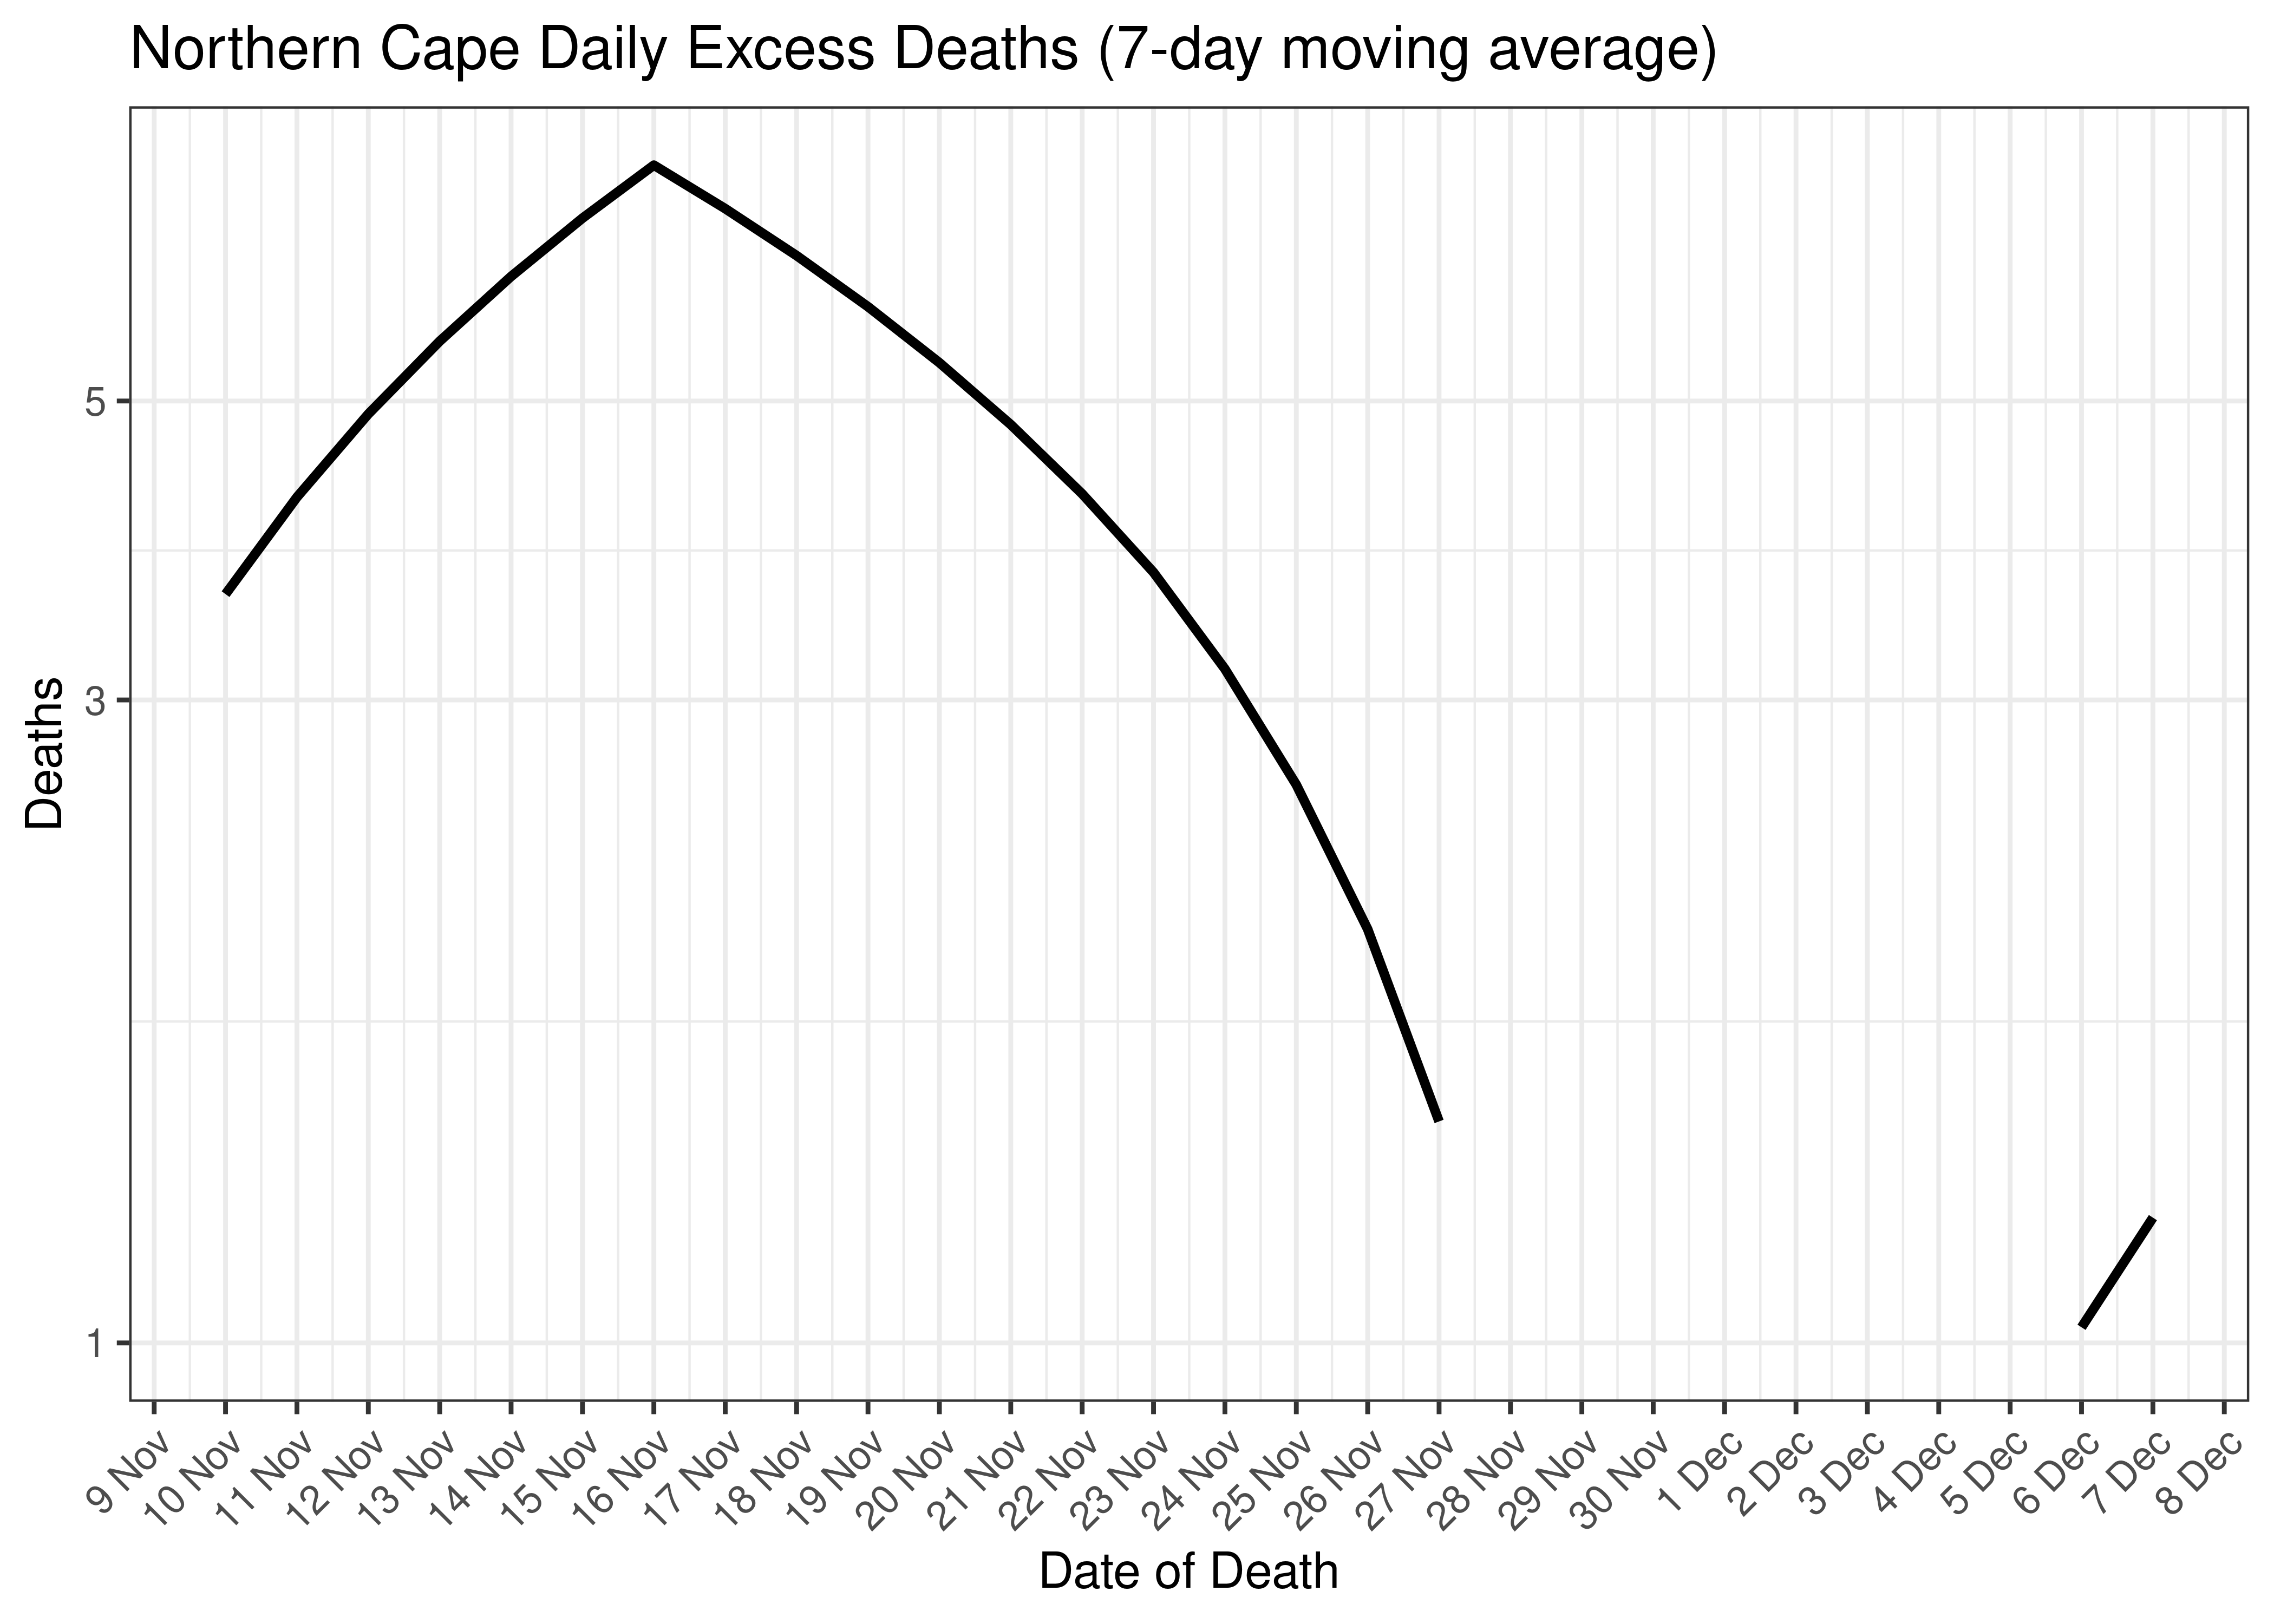 Northern Cape Daily Excess Deaths for Last 30-days (7-day moving average)